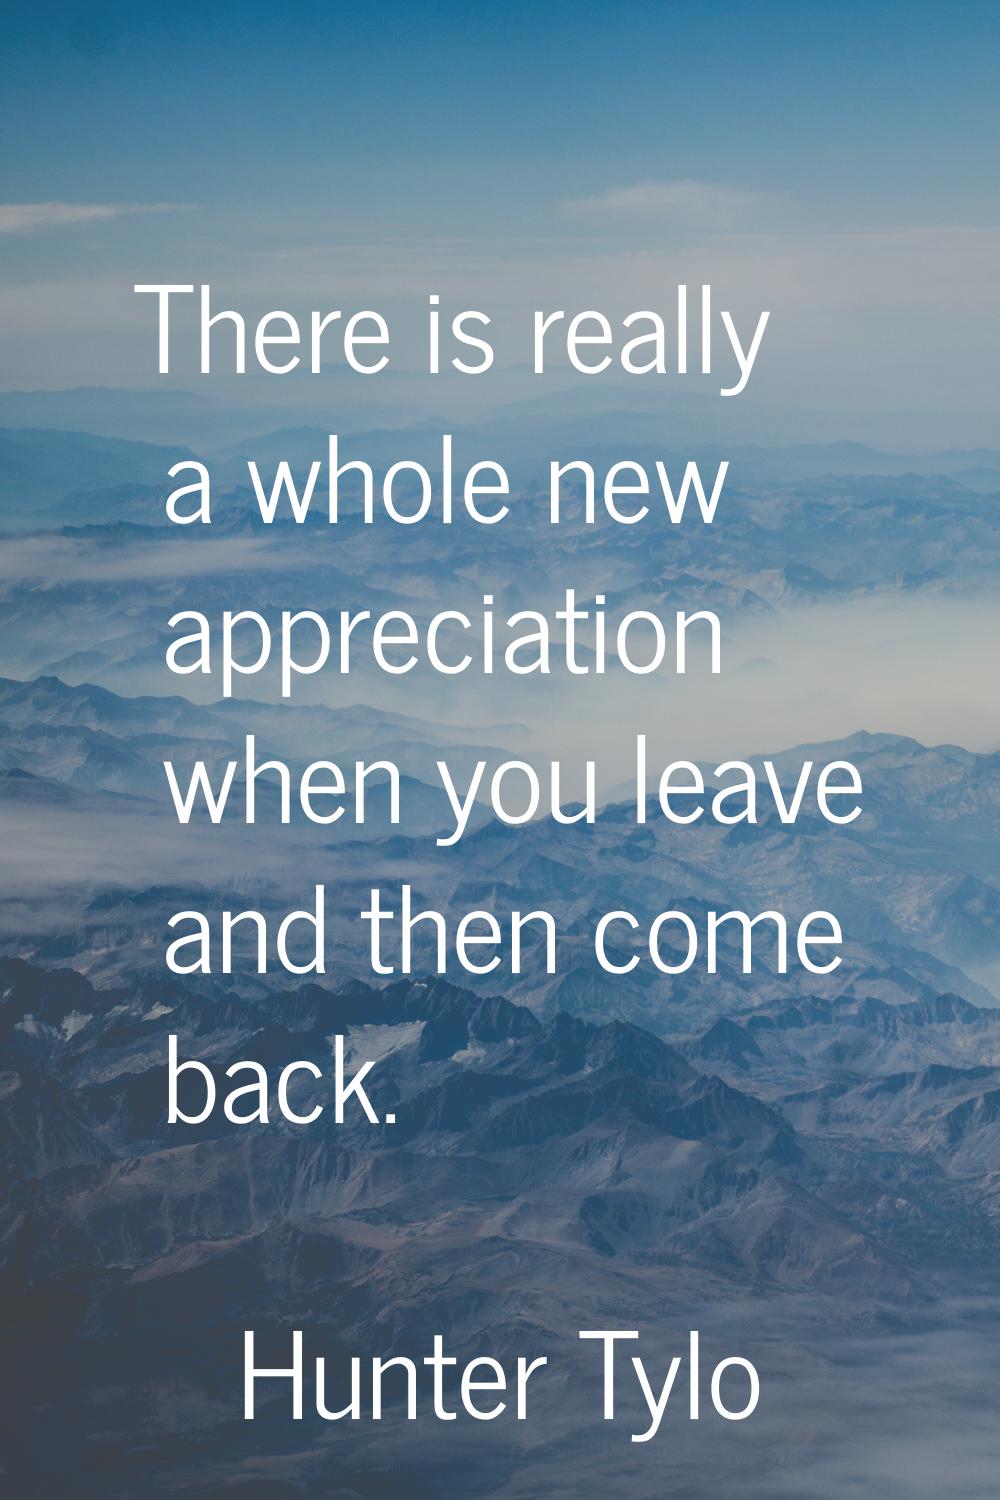 There is really a whole new appreciation when you leave and then come back.